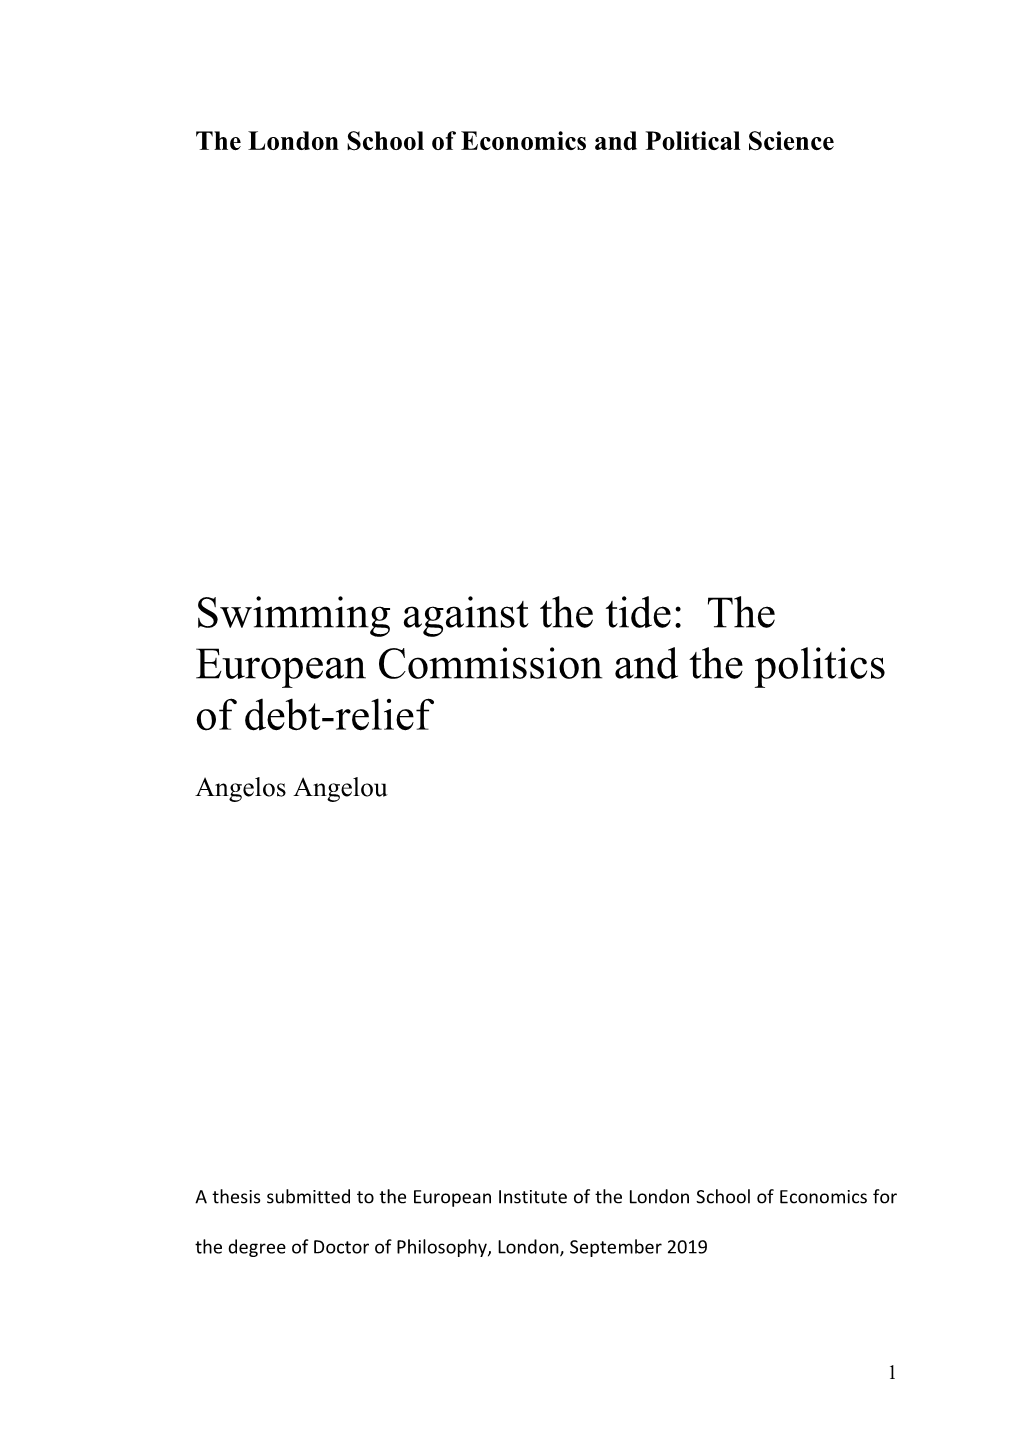 The European Commission and the Politics of Debt-Relief